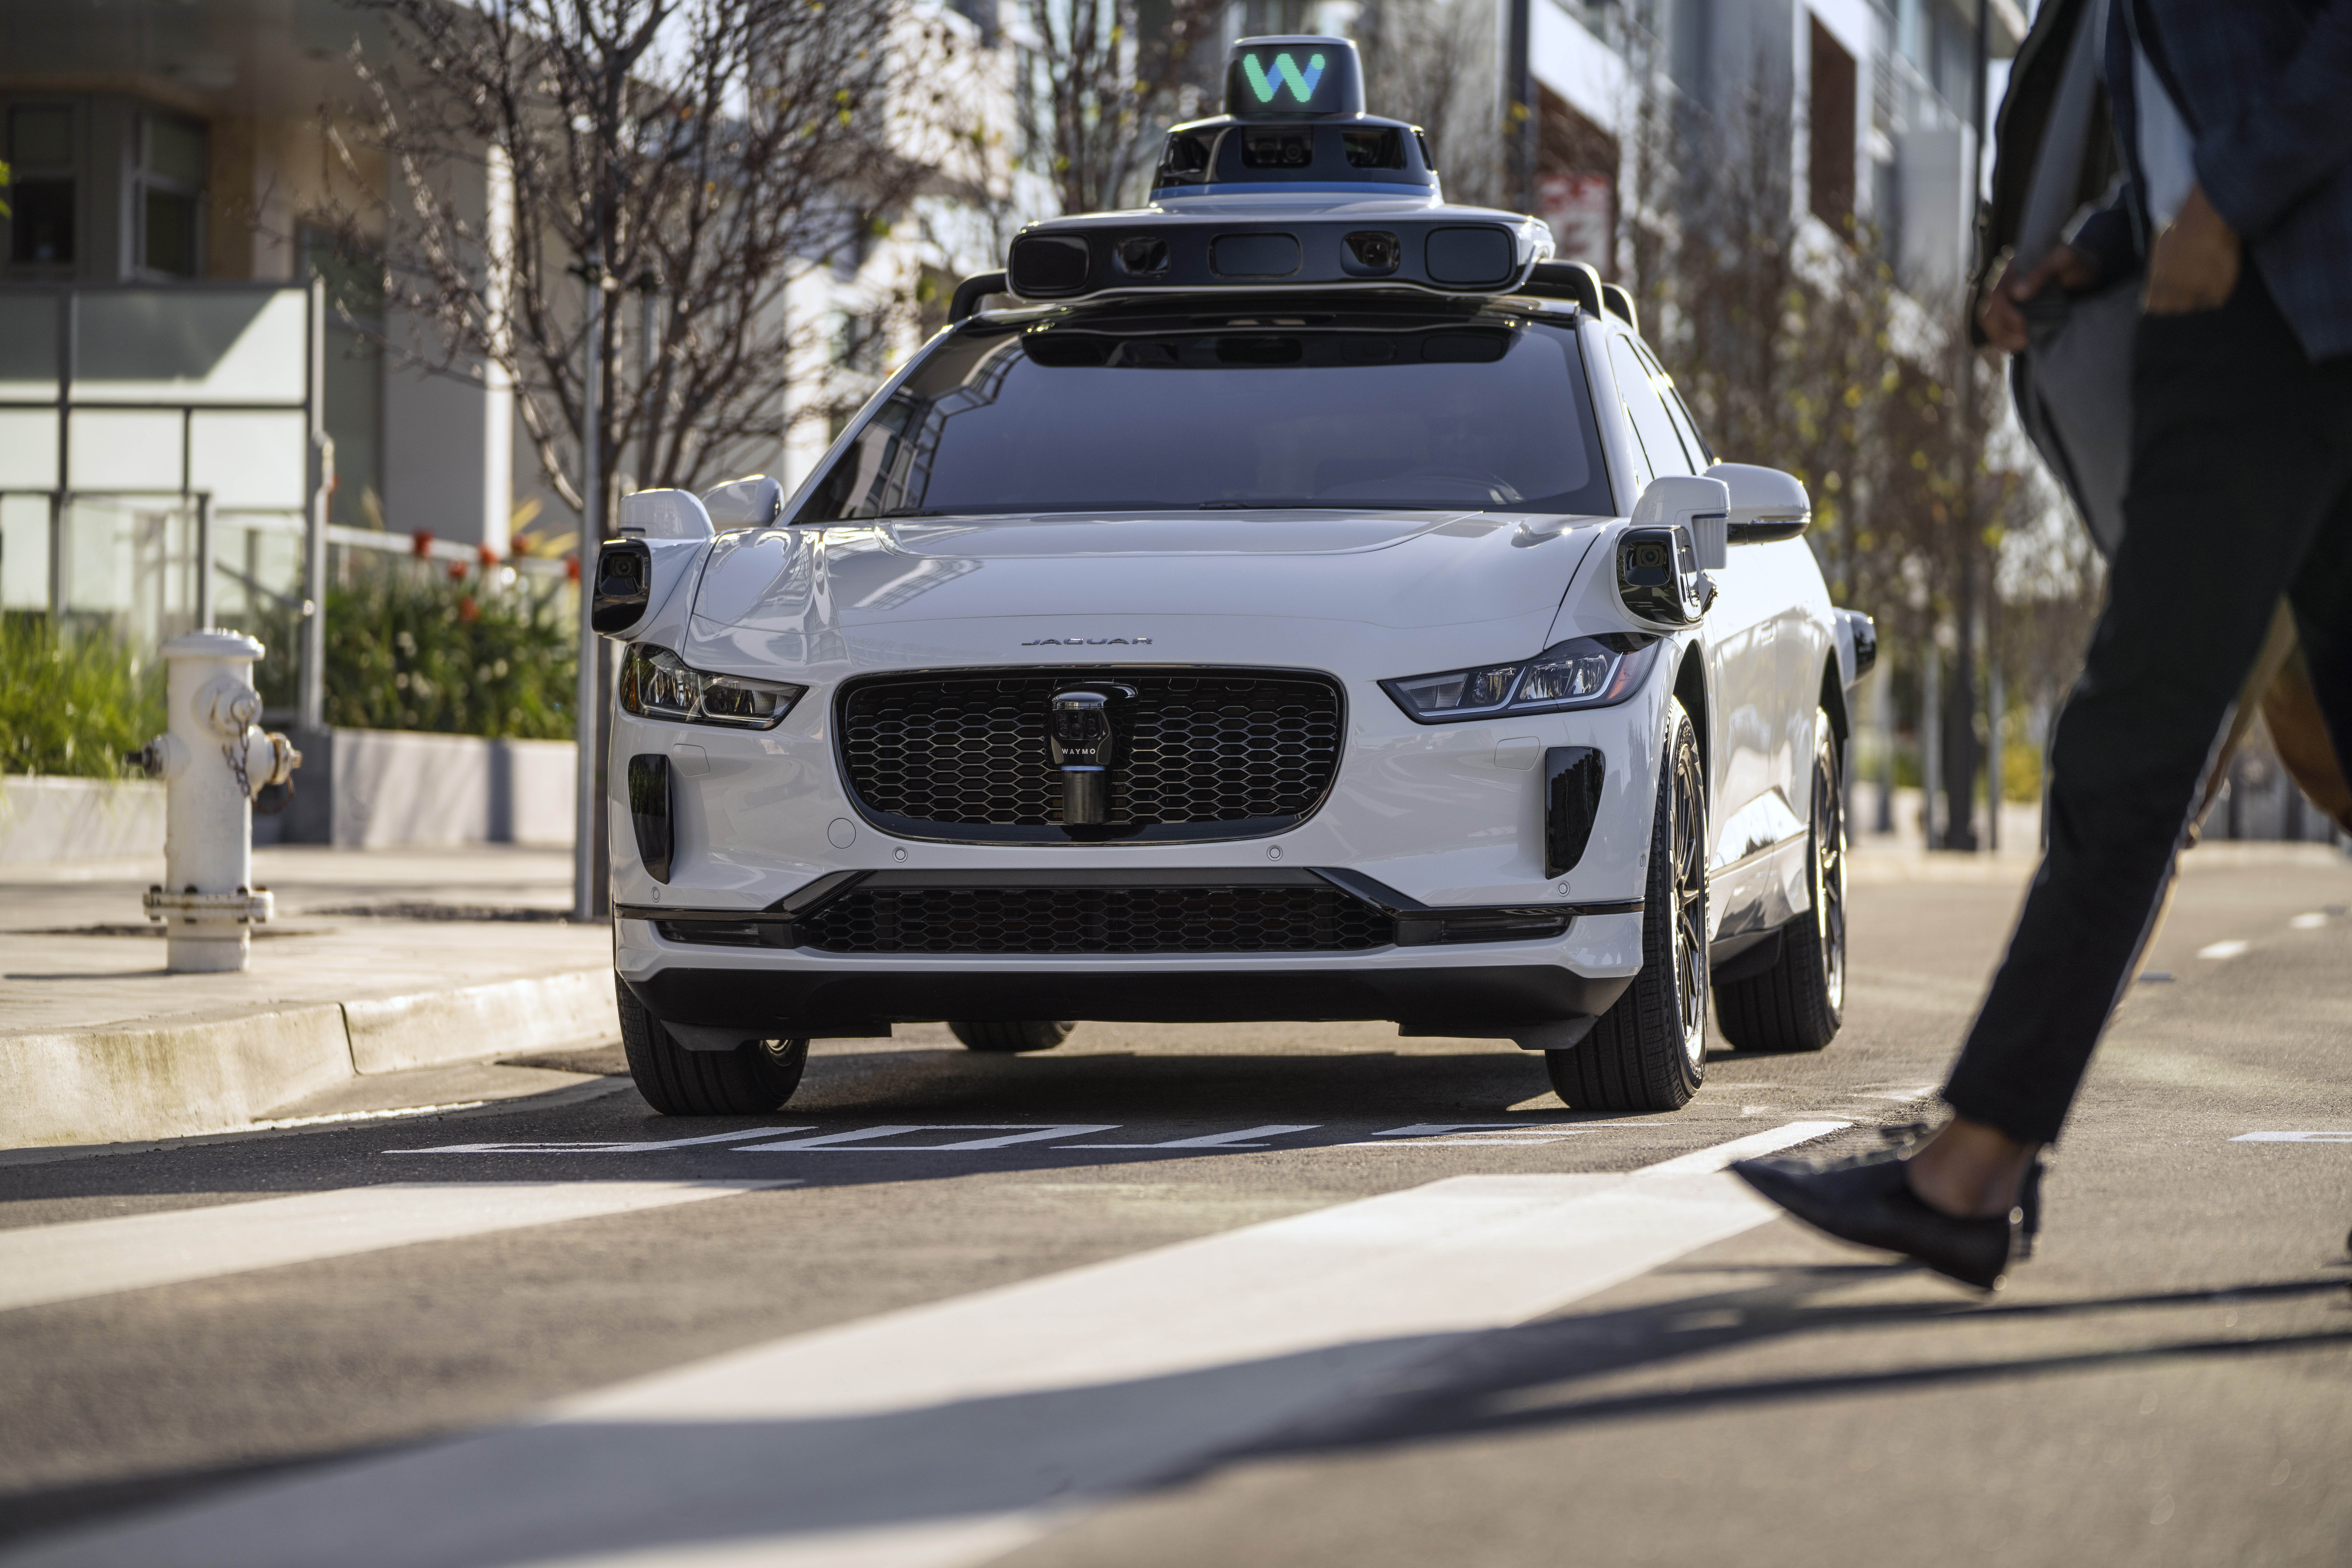 The “loss of life of self-driving automobiles” has been vastly exaggerated